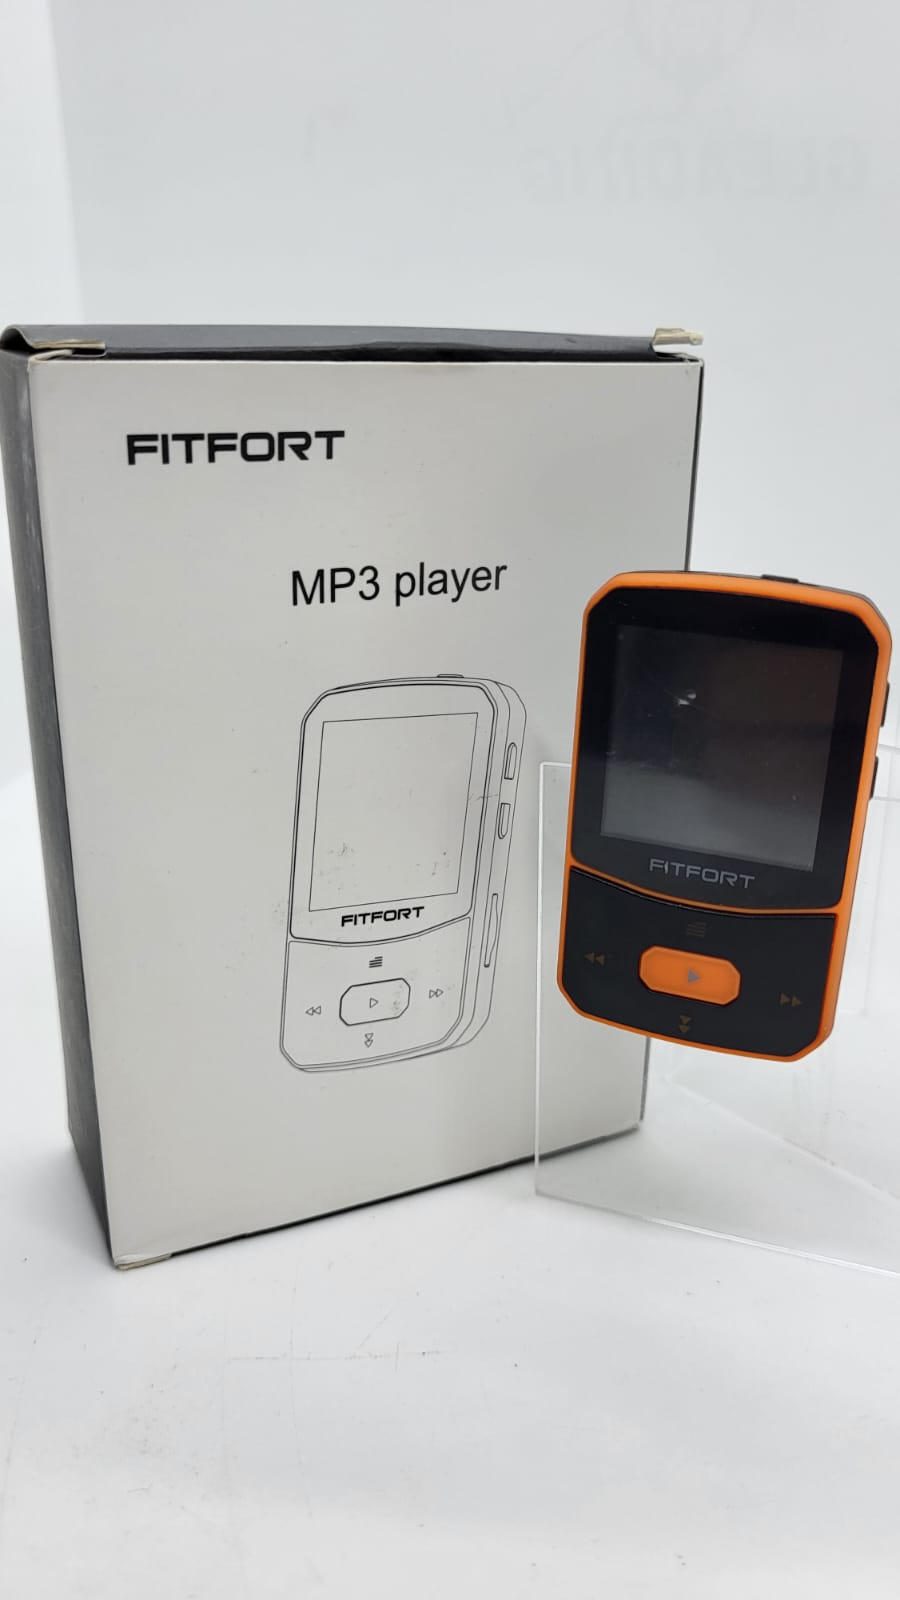 REPRODUCTOR MP3 CON BLUETOOTH FIRFORT